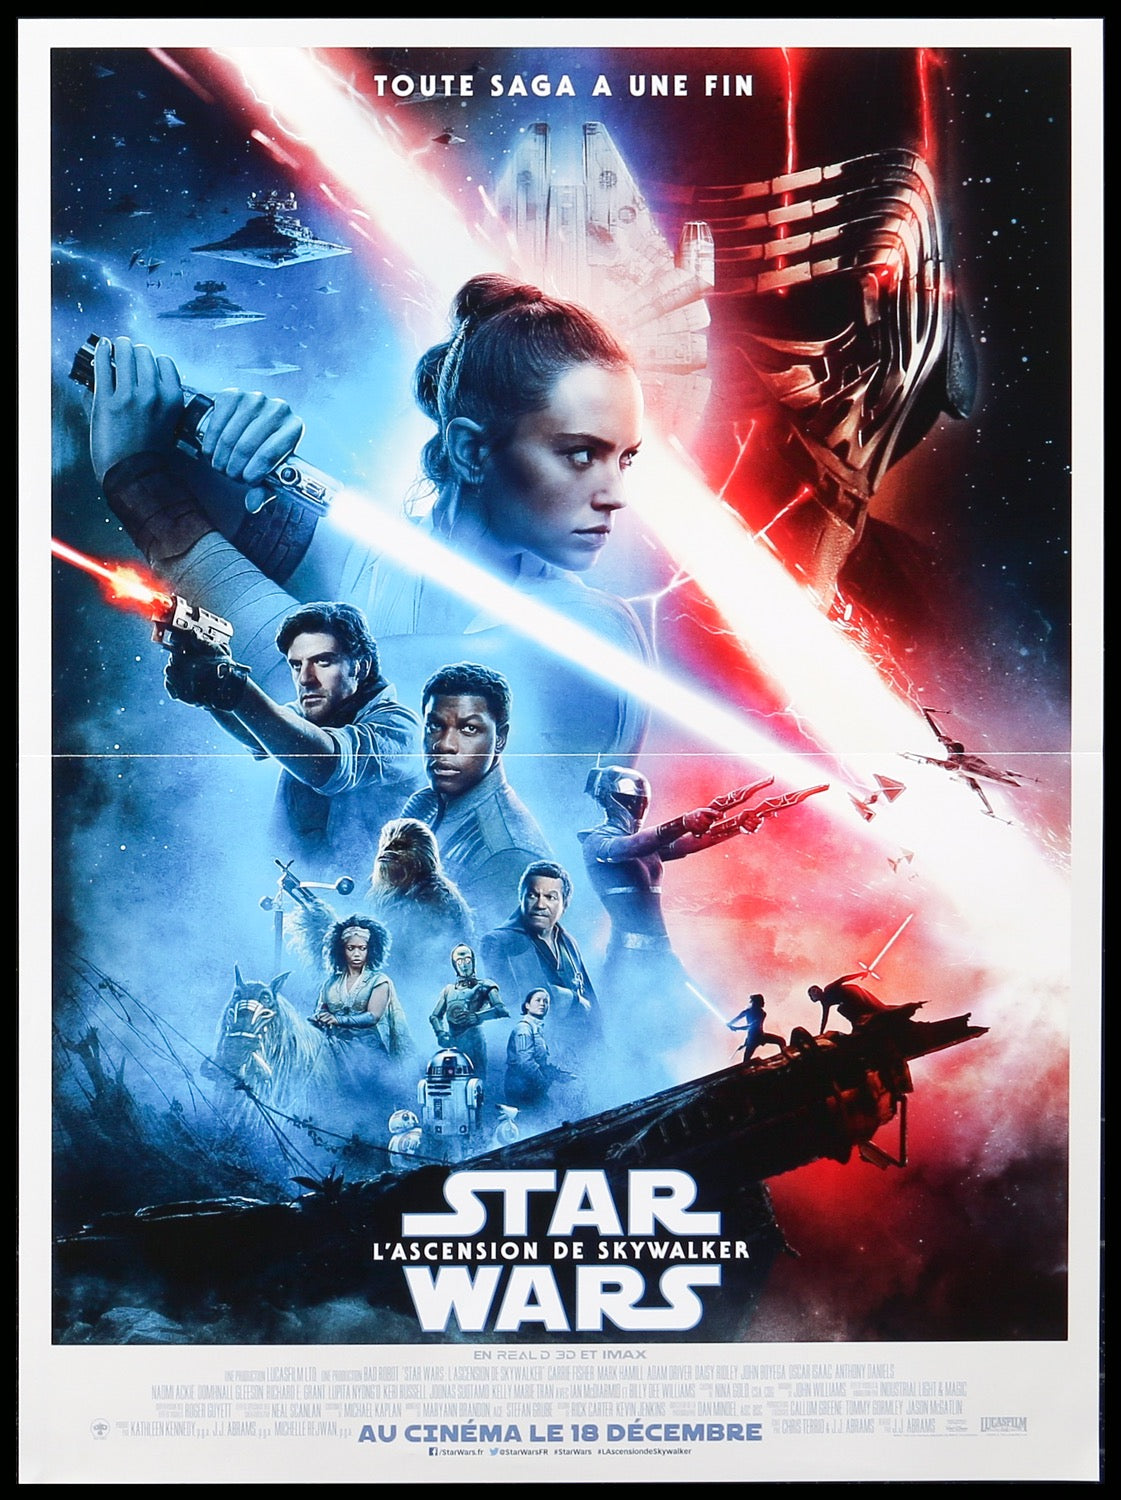 Stars Wars Posters for Sale